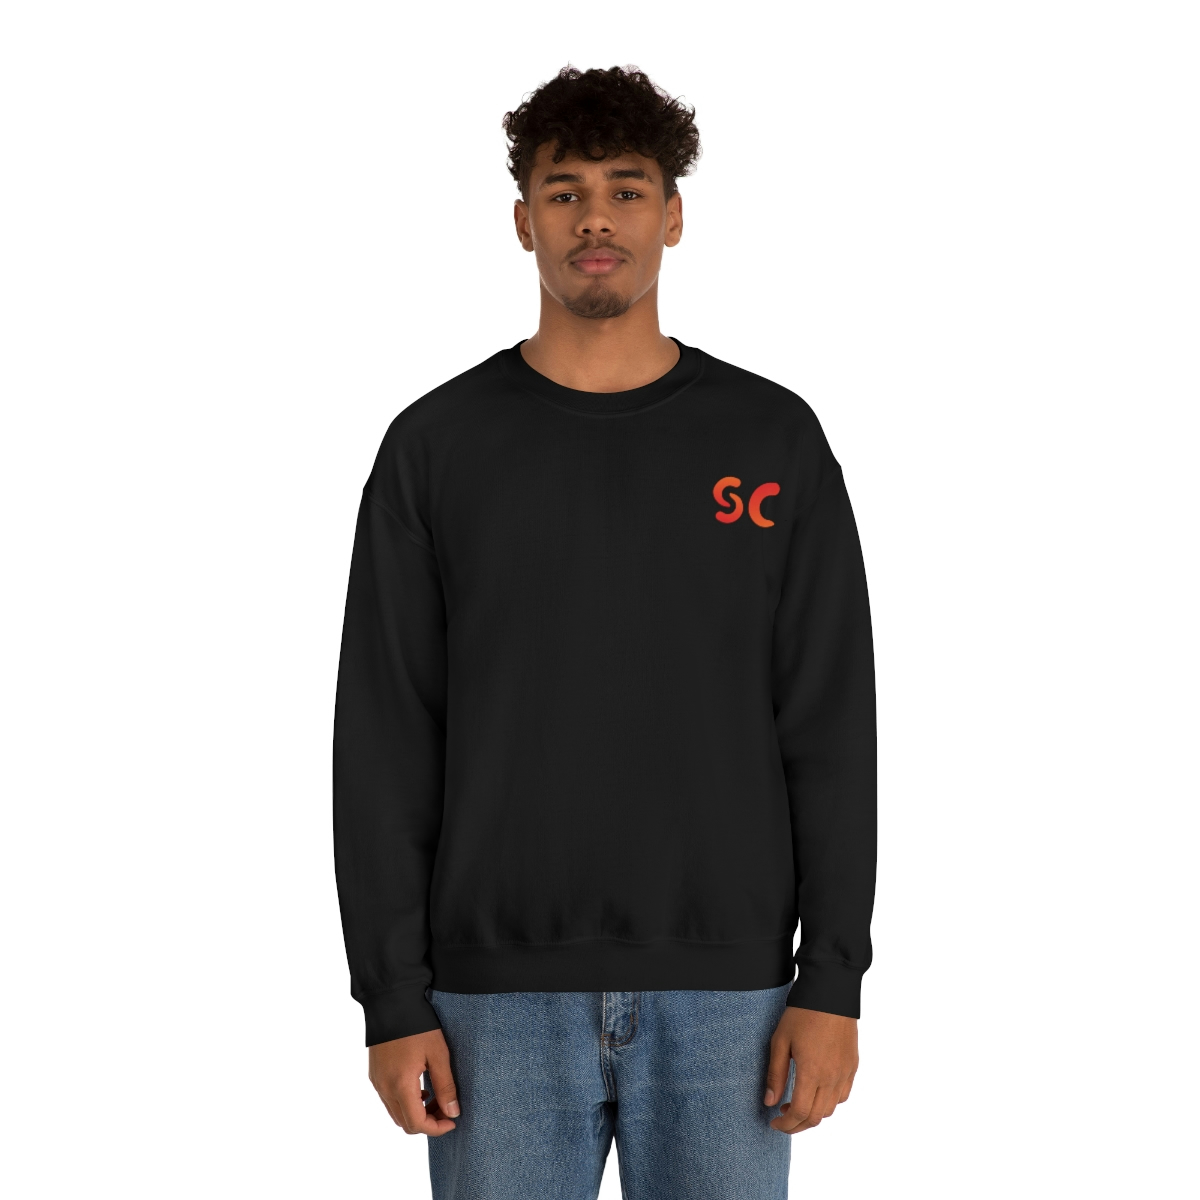 A young medium skin tone male model wearing a black sweatshirt with stylized "SC" over the left breast denoting sickle cell trait status.